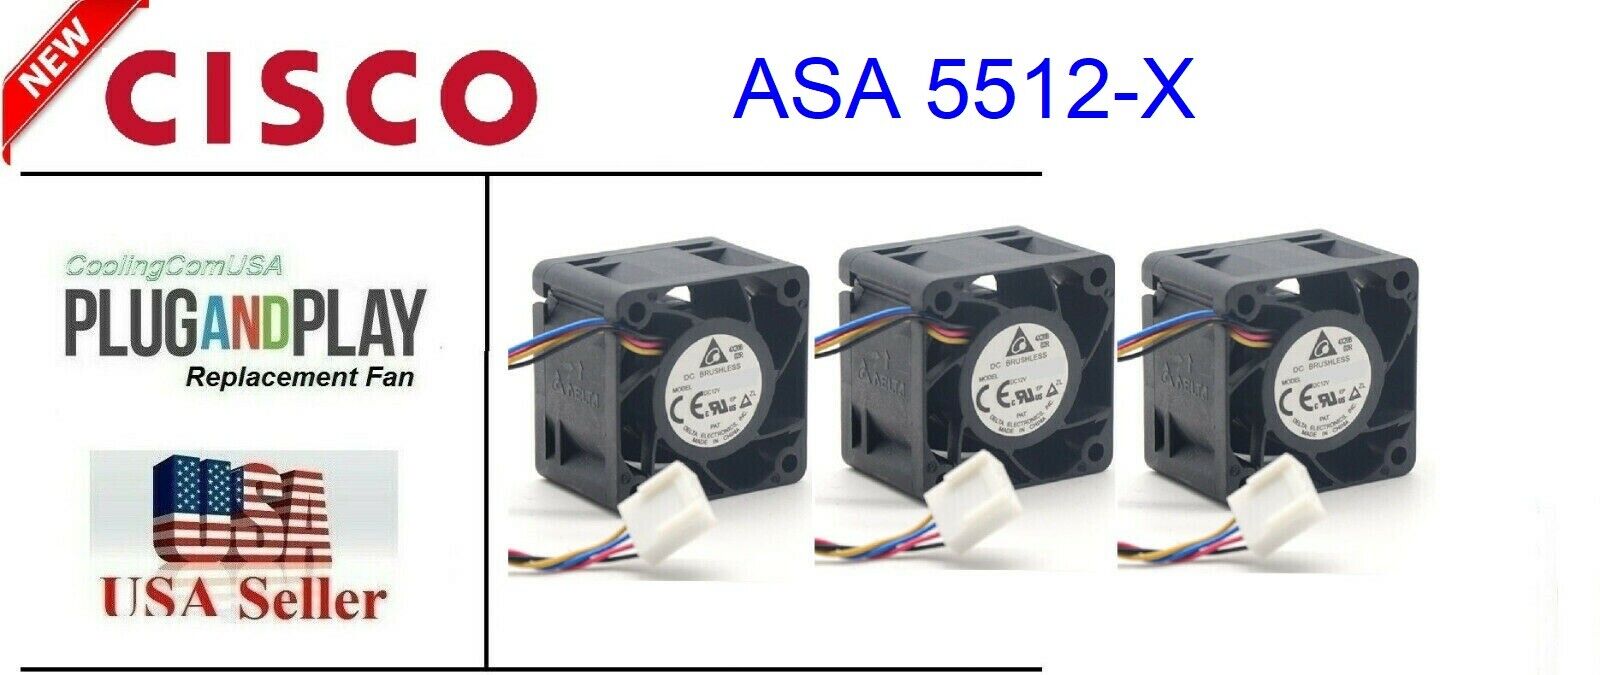 3 Pack New Replacement Fans for Cisco ASA 5512-X Satisfaction Guaranteed